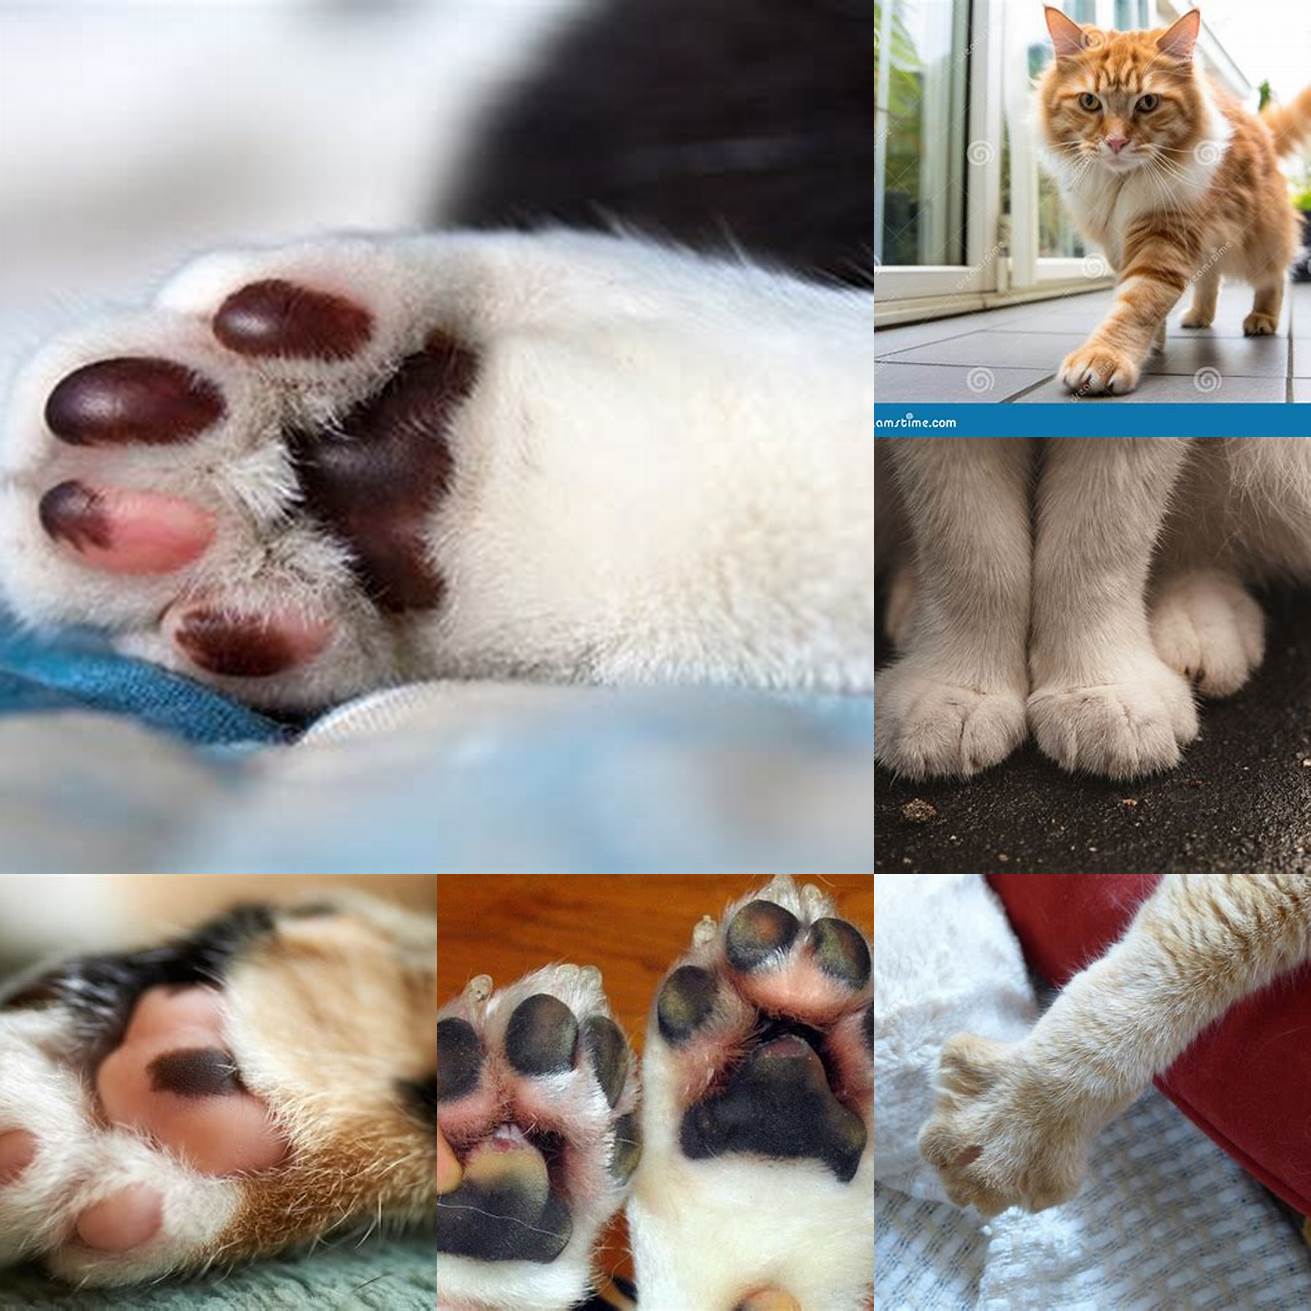 Pain or discomfort when walking or using the affected paw